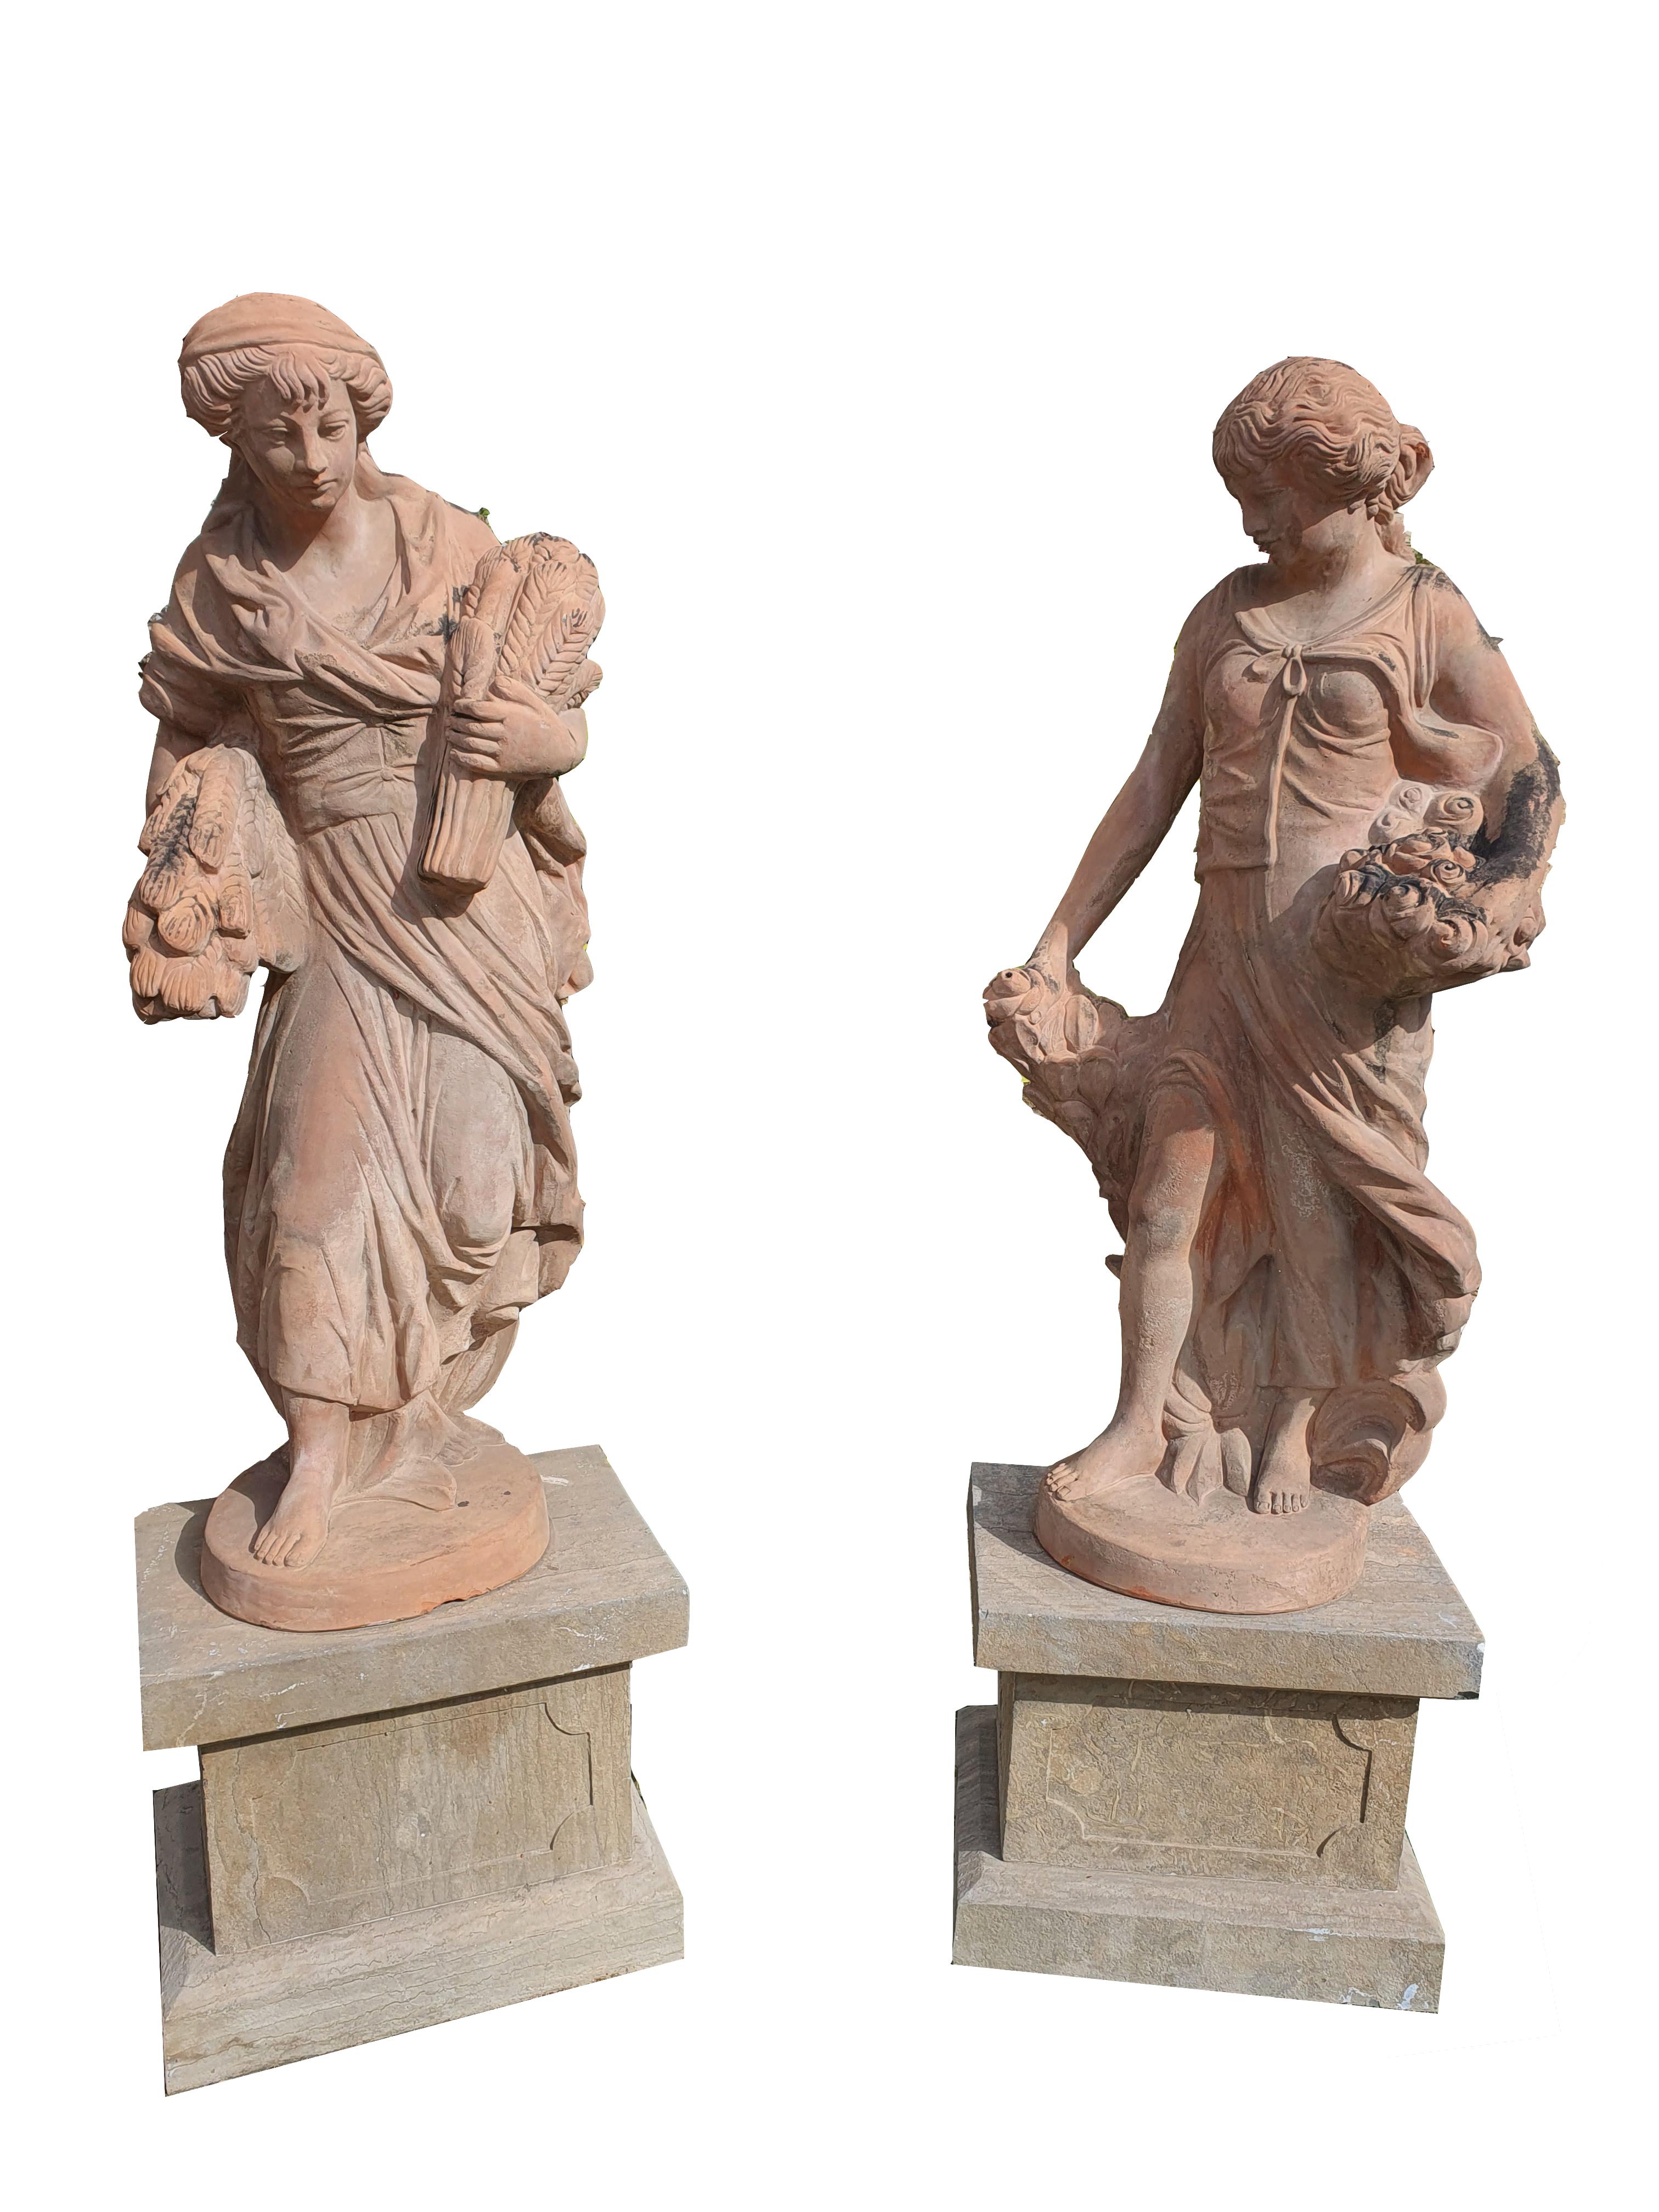 Finely crafted Italian terracotta sculptures depicting the four seasons. On stone bases prior to the period of making the statues. The sculptures are from the early 1900s, the bases from the late 19th century.